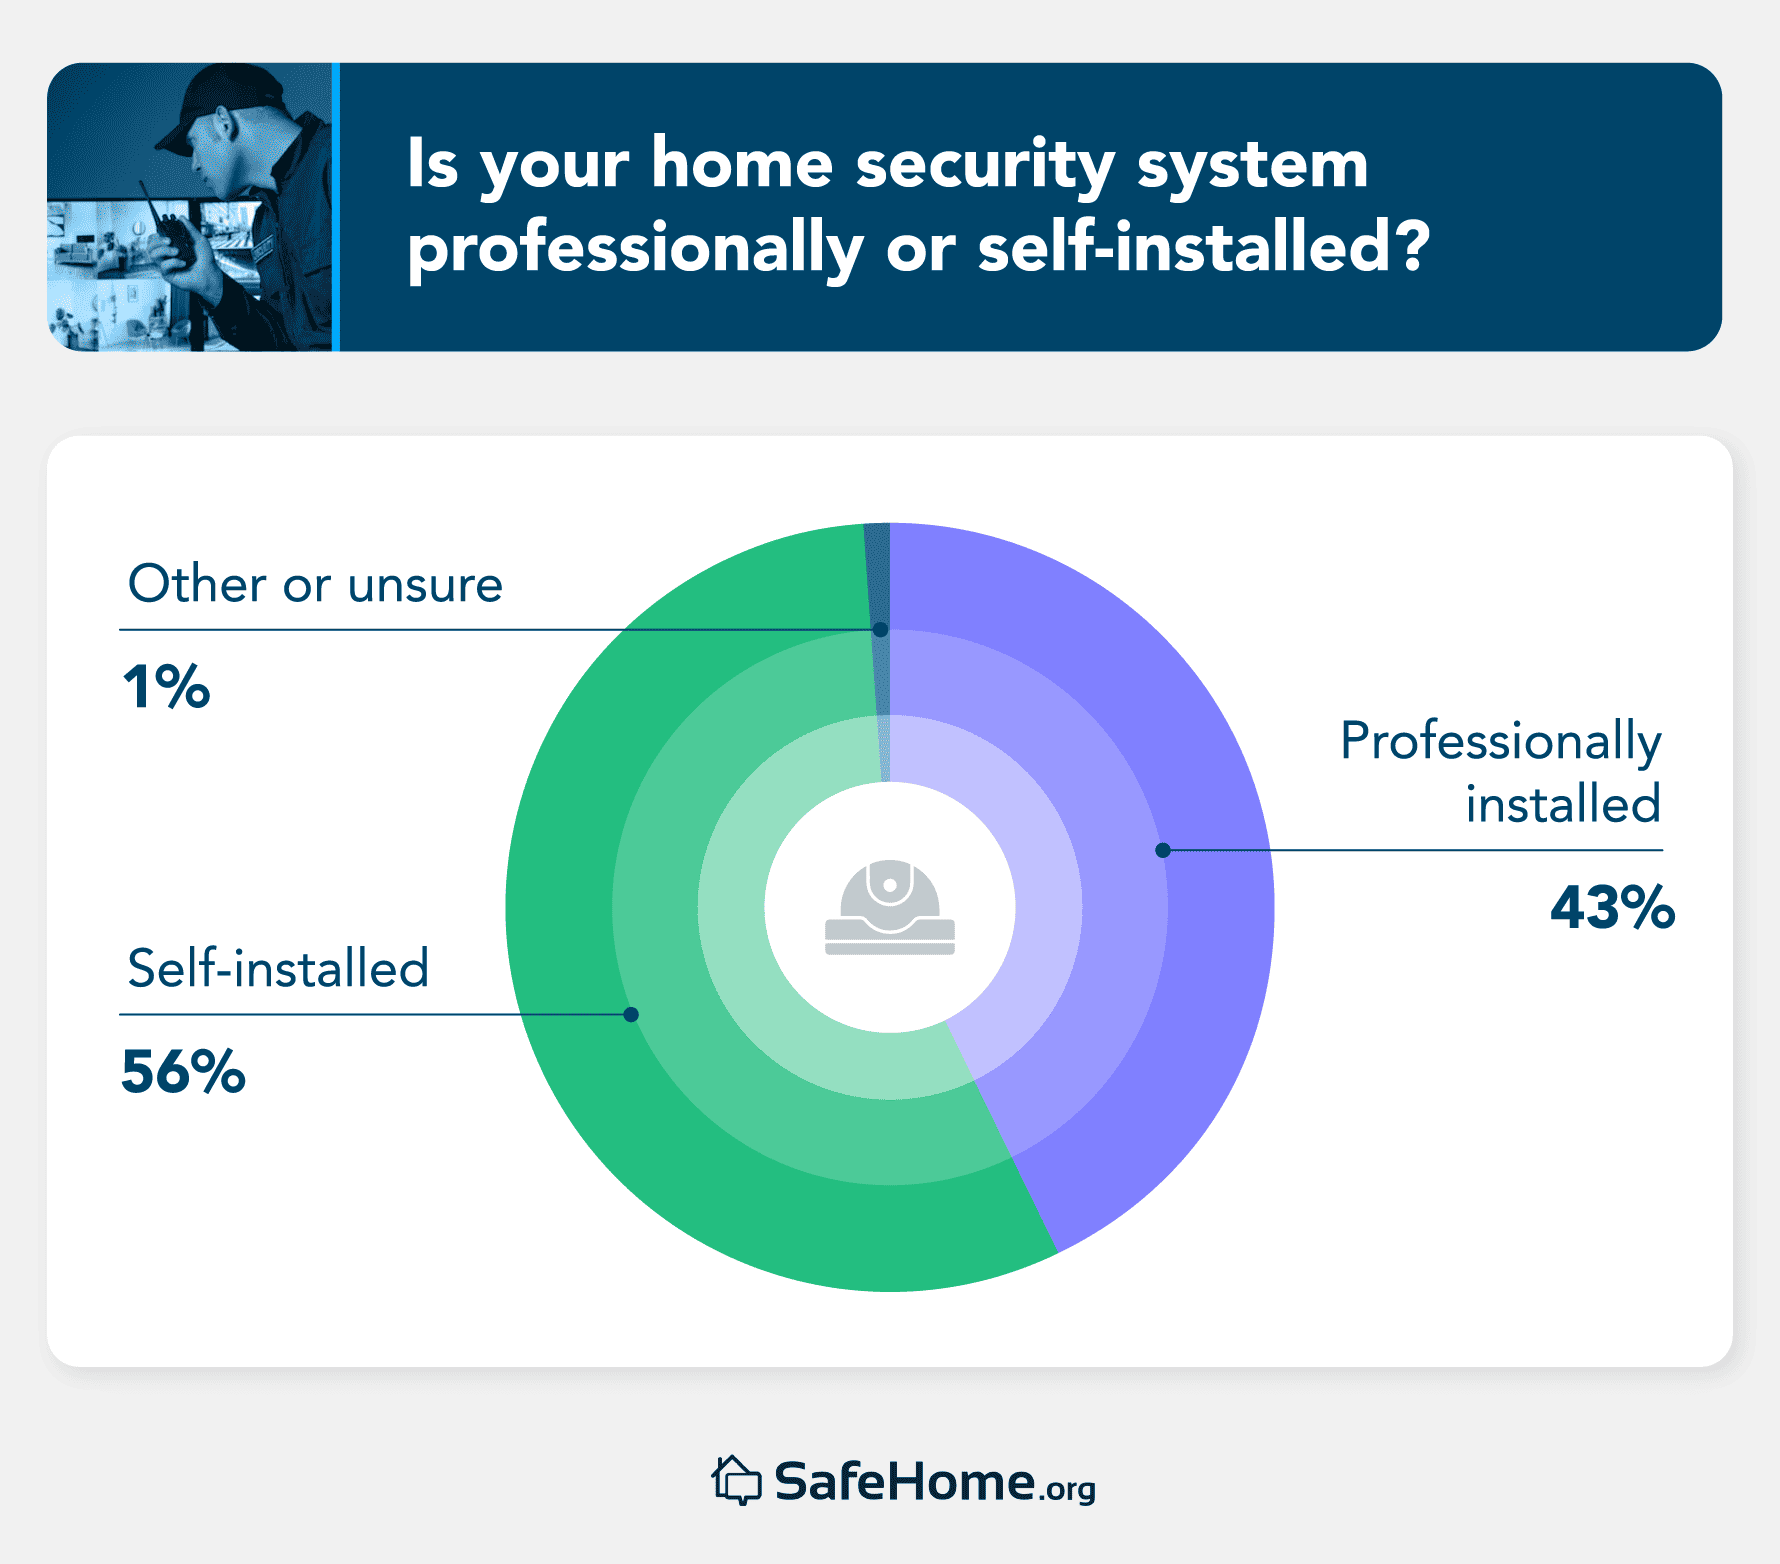 Is your home security system professionally or self-installed